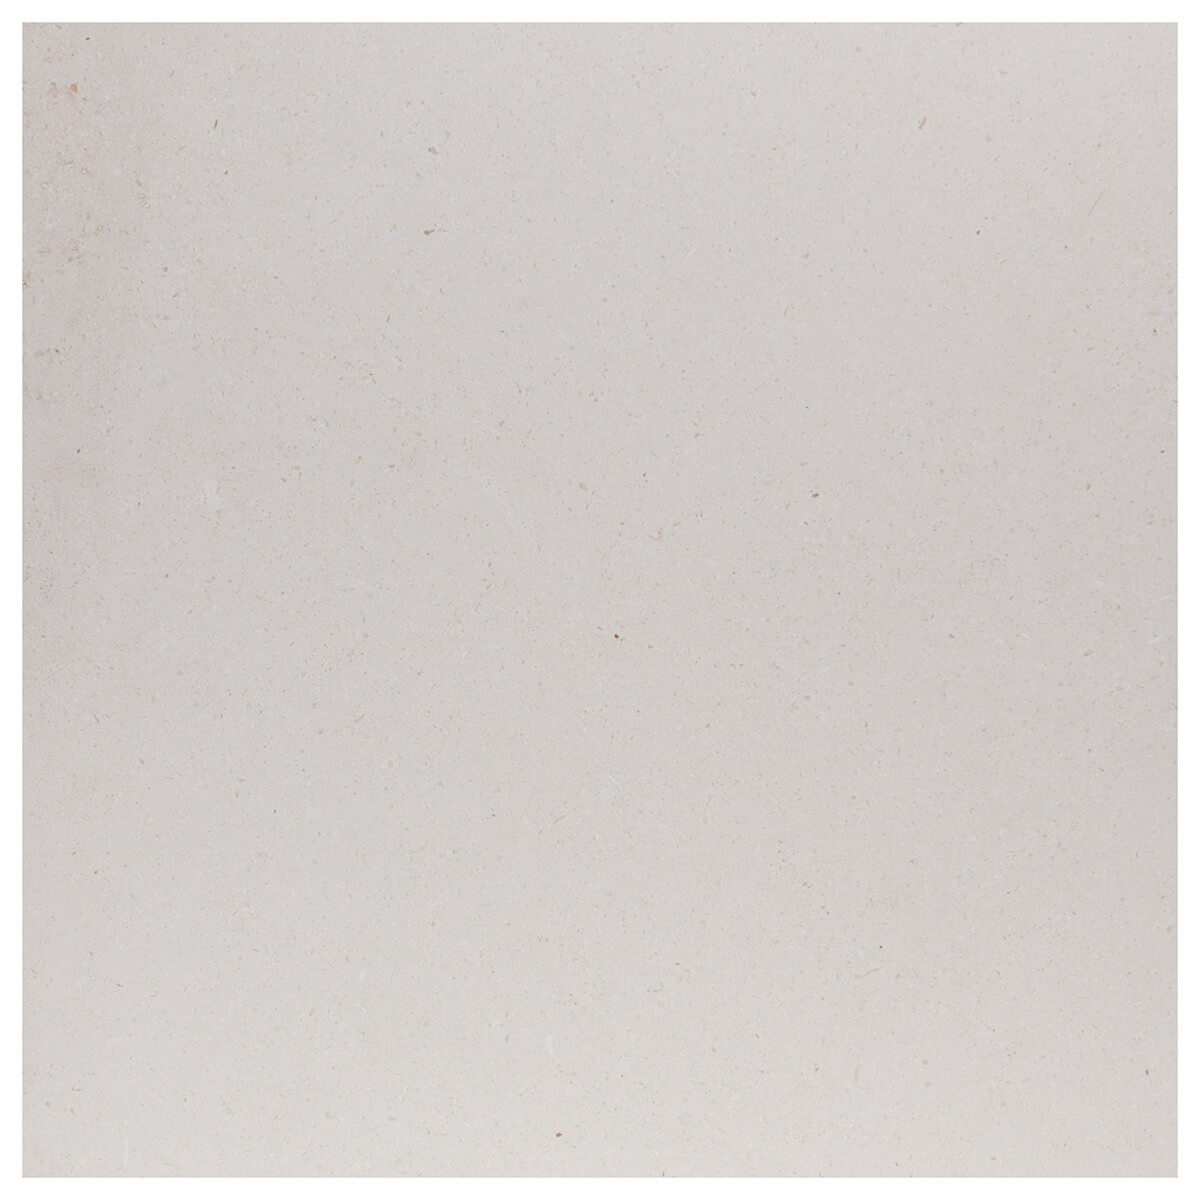 Champagne field tile from Haussmann Natural Stone, 18x18x0.375 inches, honed finish, high-quality limestone